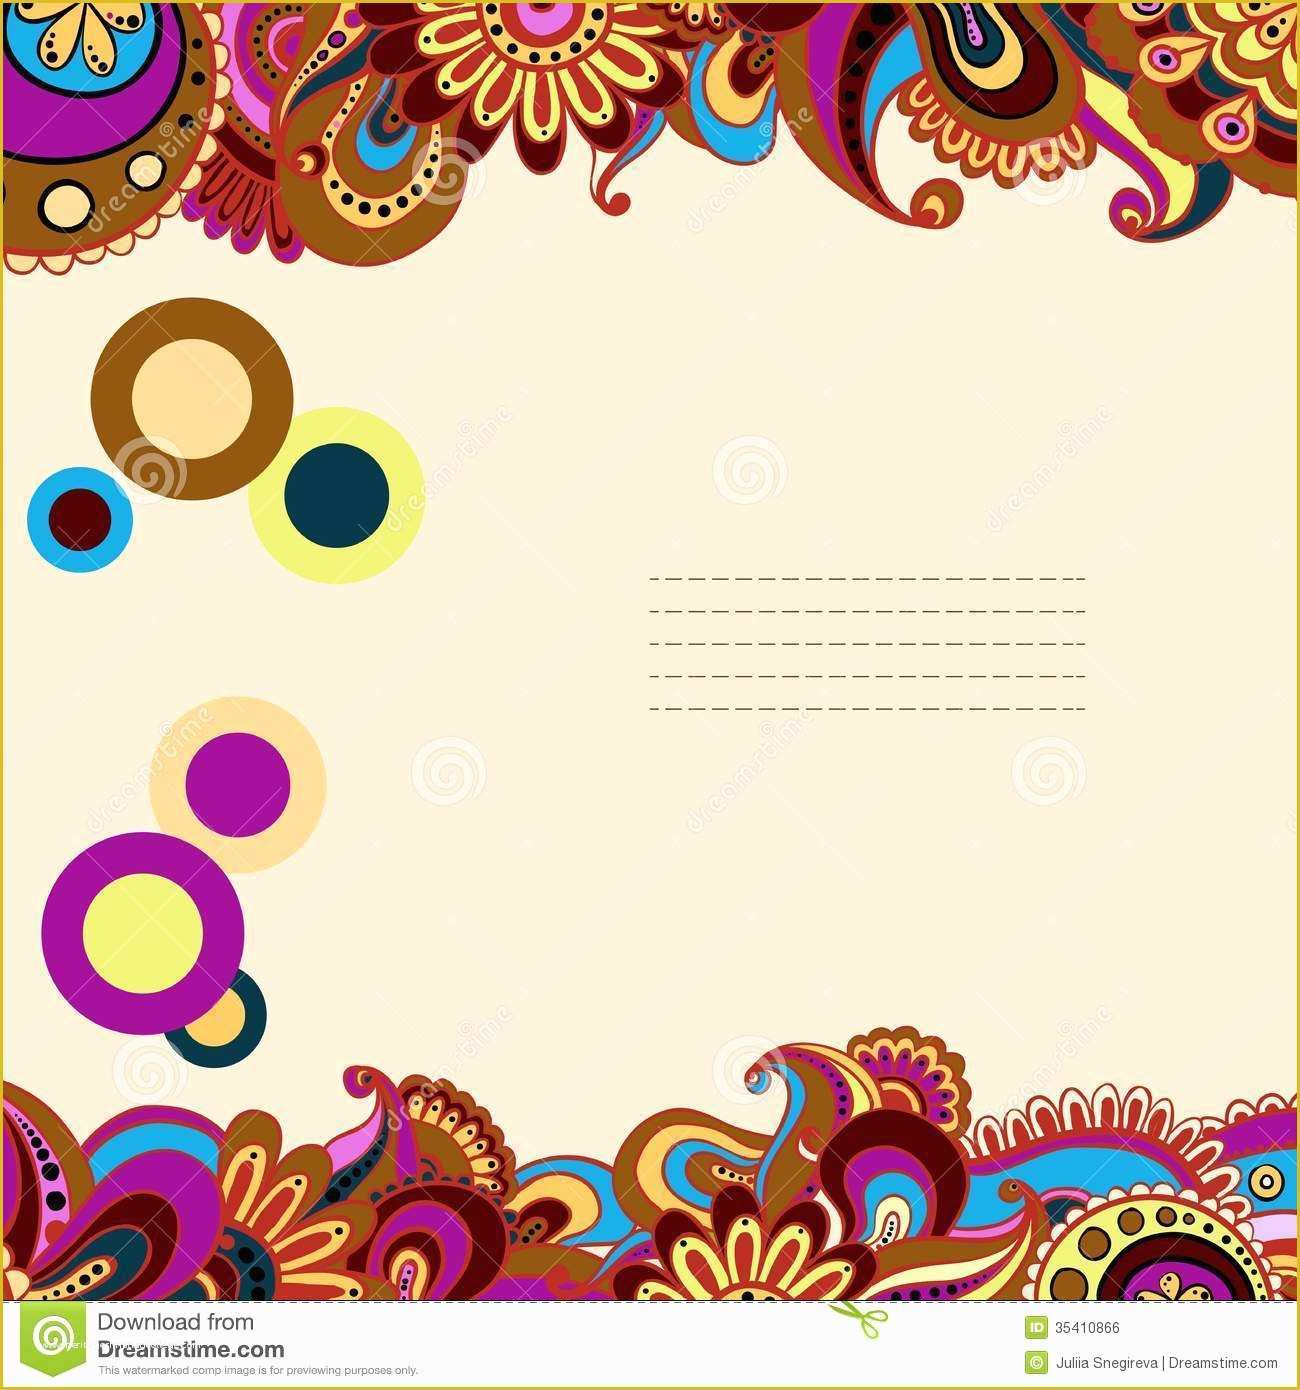 Video Background Template Free Download Of Vector Floral Decorative Background Royalty Free Stock